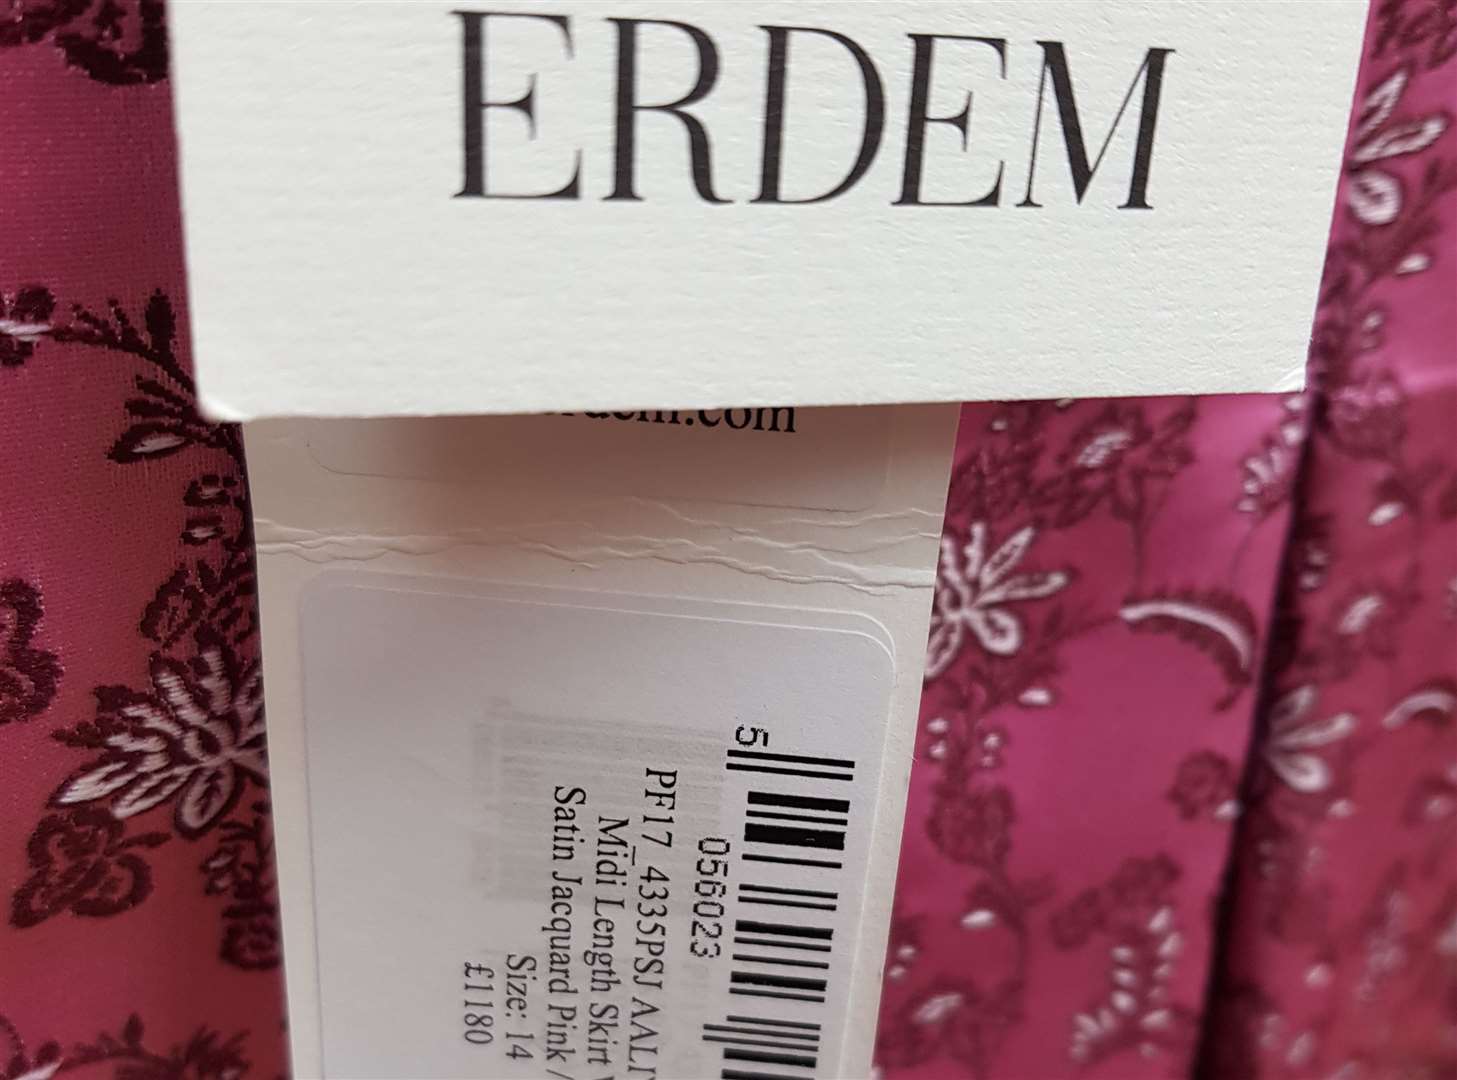 An Erdem skirt with original tags showing its retail price of £1,180